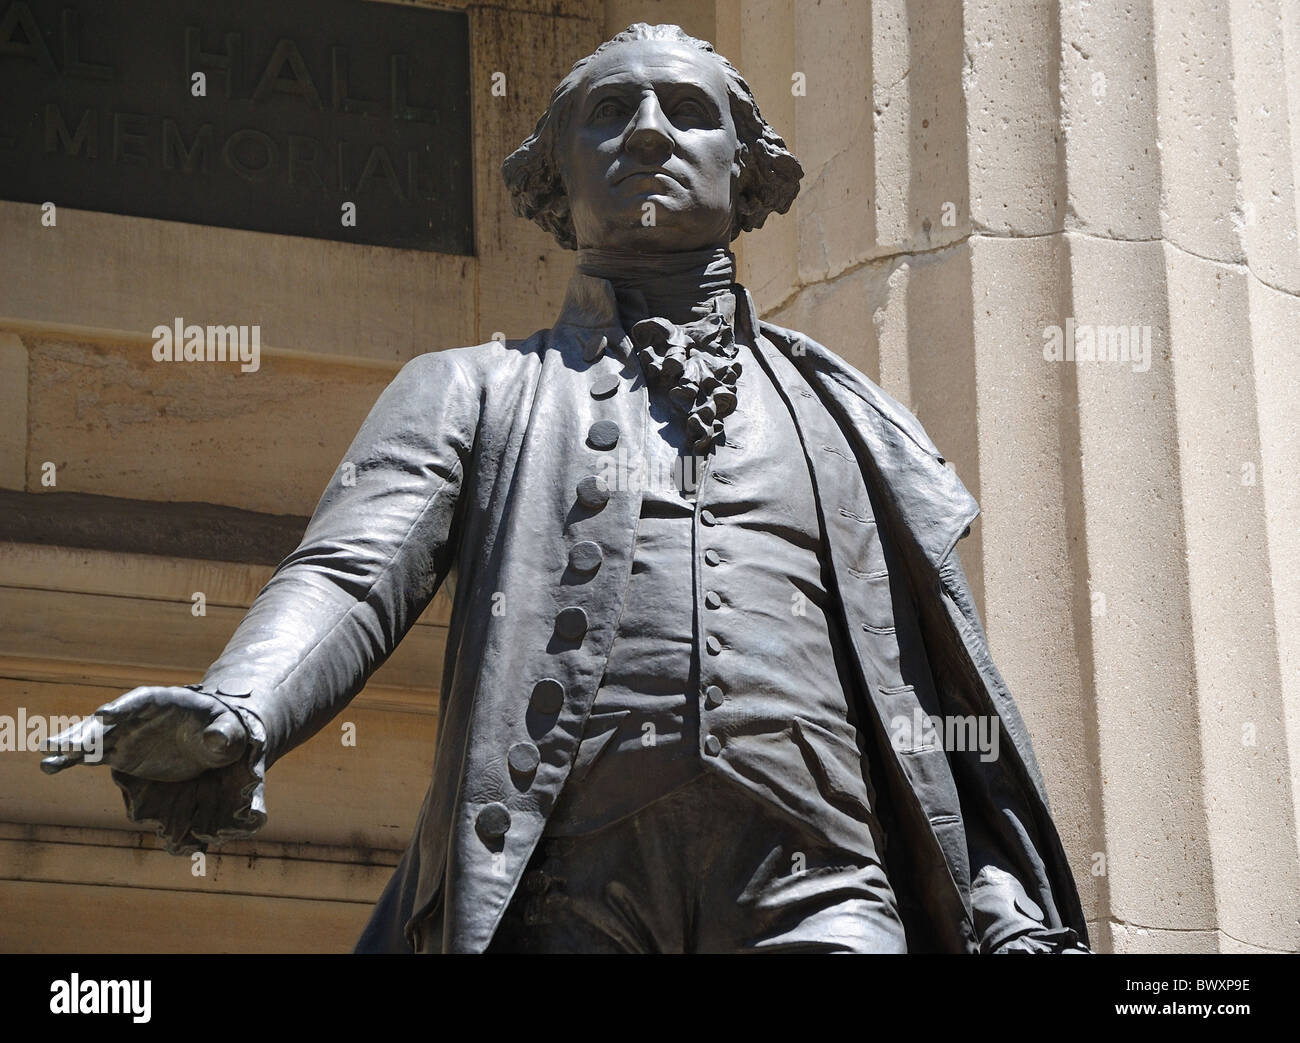 George Washington memorial at Federal Hall, the First Capitol of the United States of America in New York, New York, USA. Stock Photo